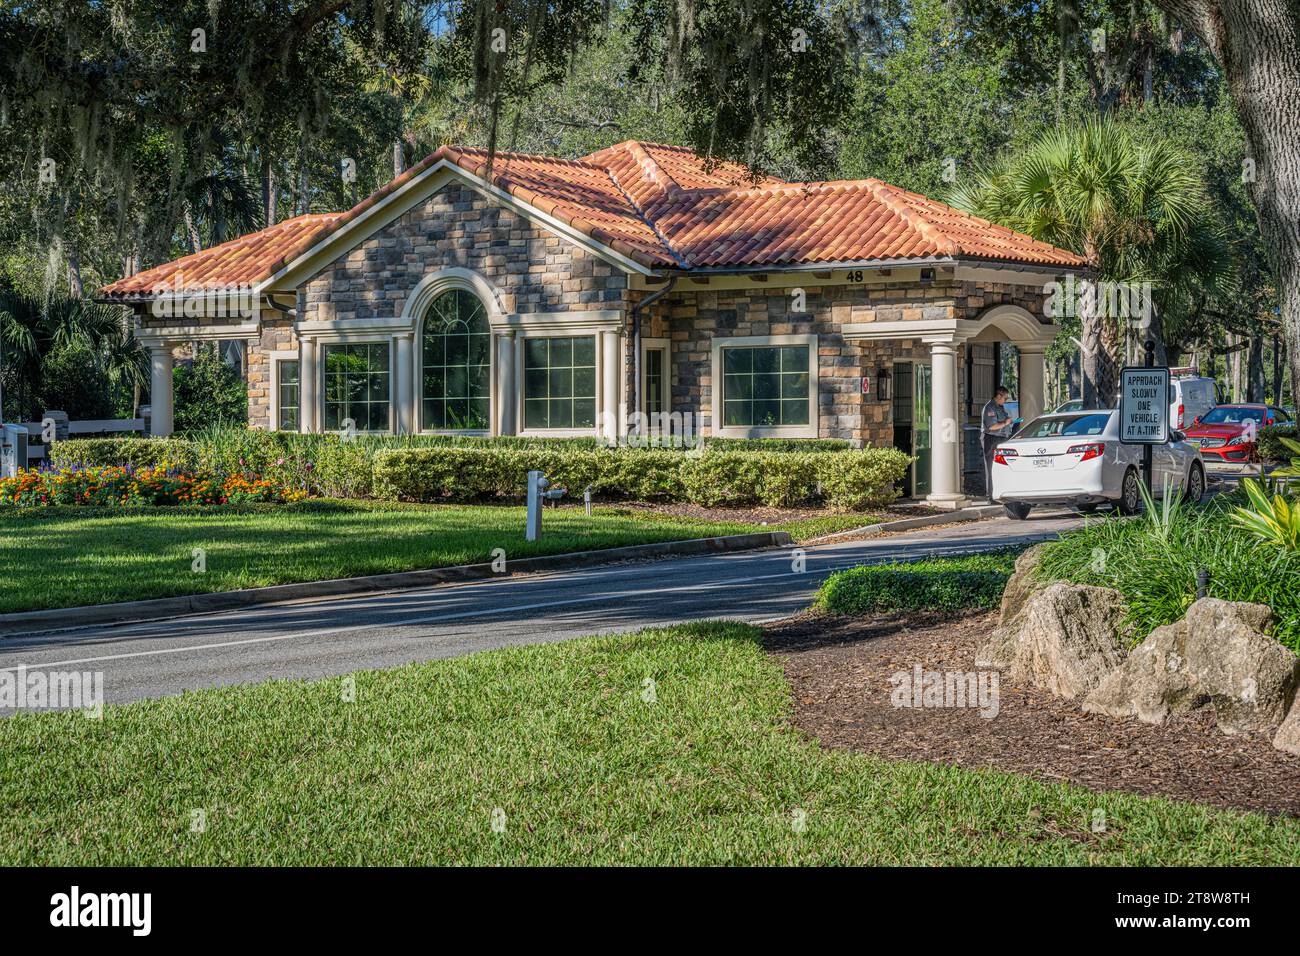 Gatehouse for Sawgrass Players Club, a private gated community and home of THE PLAYERS Golf Championship at TPC Sawgrass in Ponte Vedra Beach, FL. Stock Photo